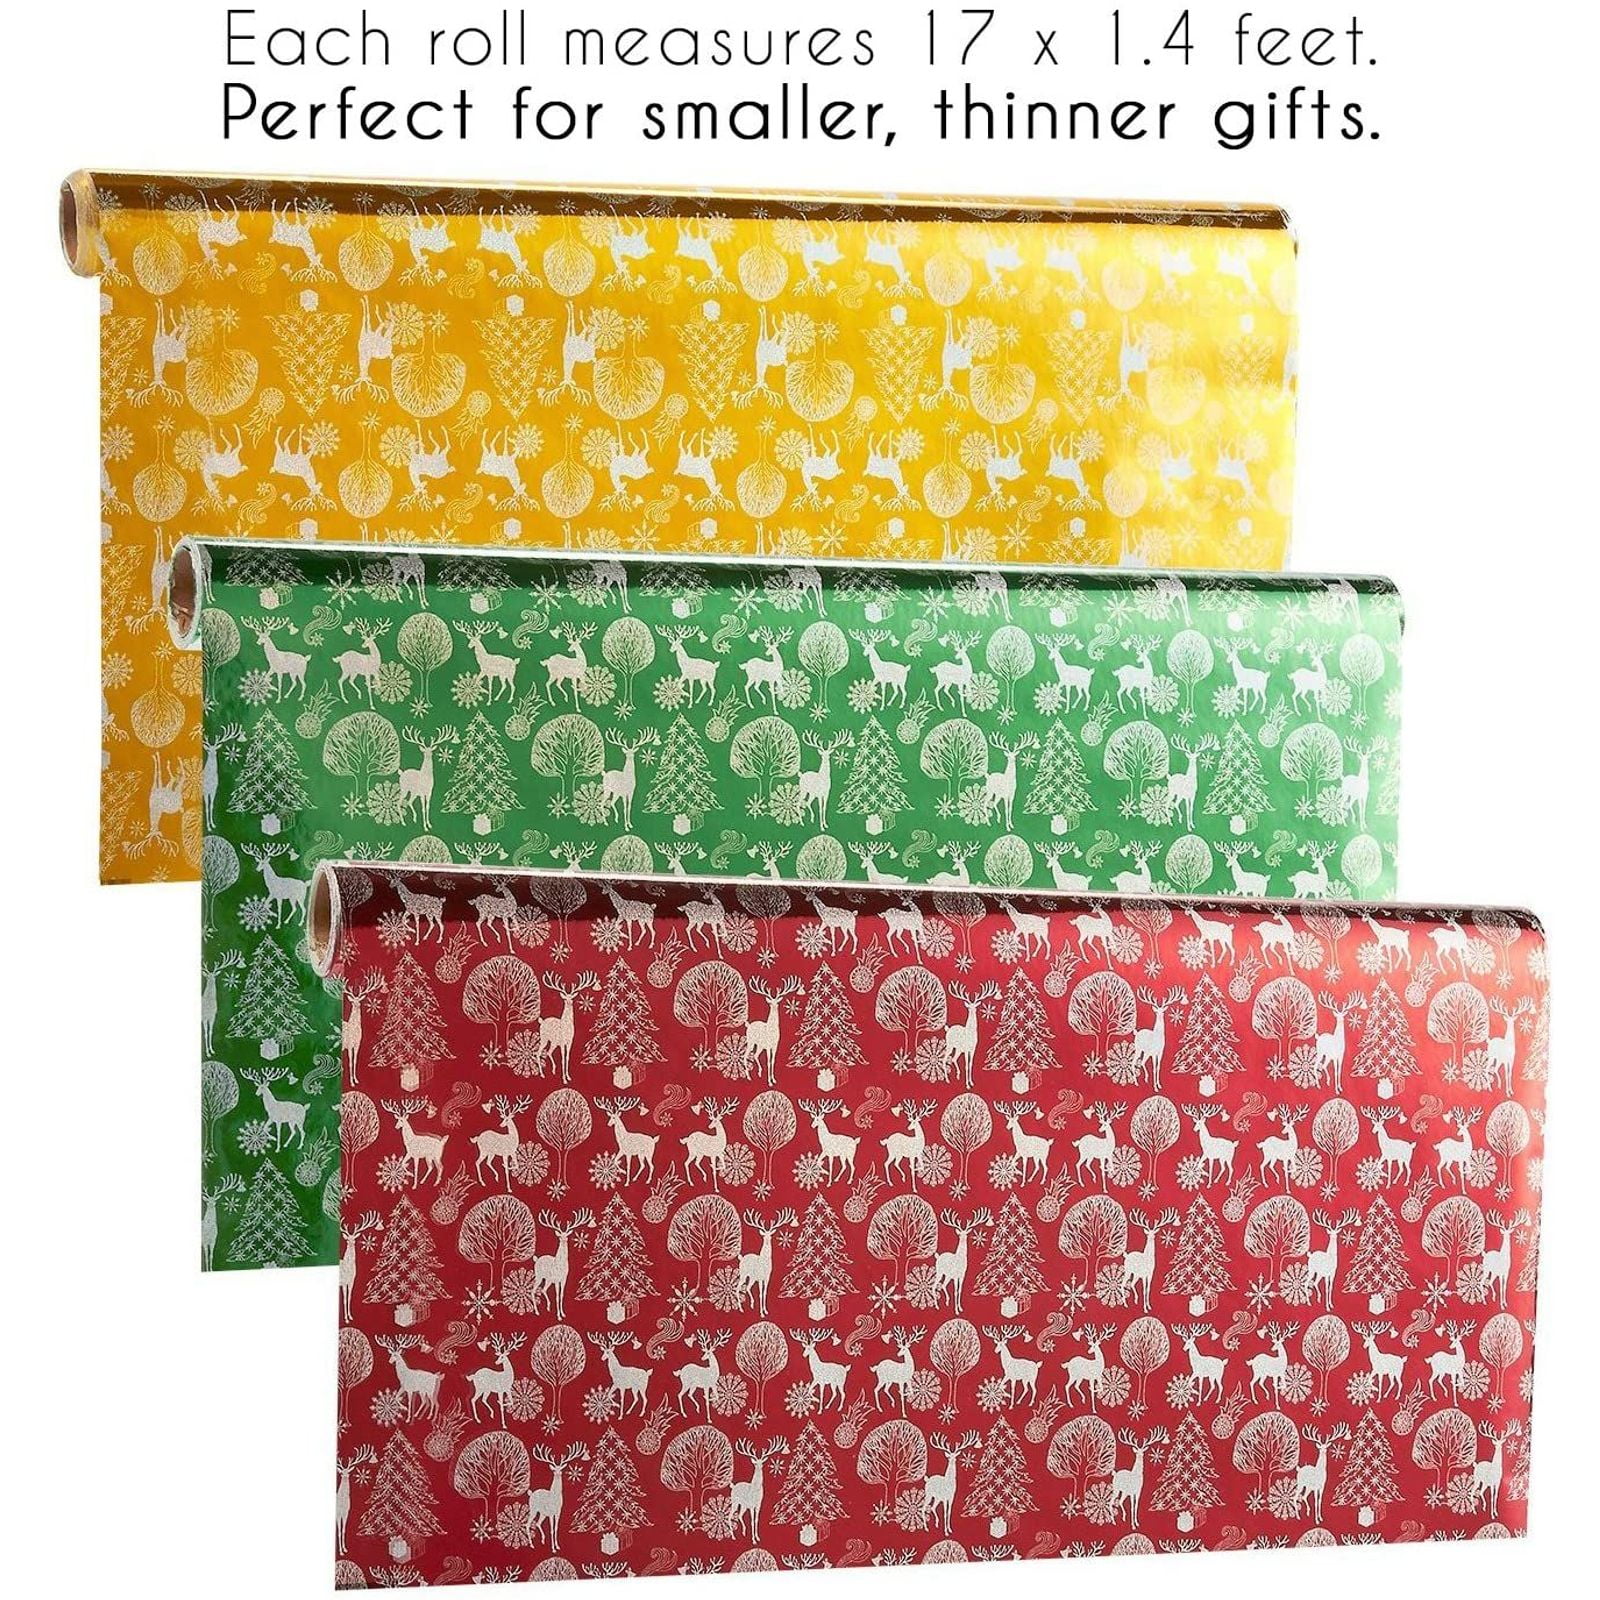 Hallmark Christmas Wrapping Paper 6 Rolls-3 Foil-2-sided gift wrap Pet-Themed 